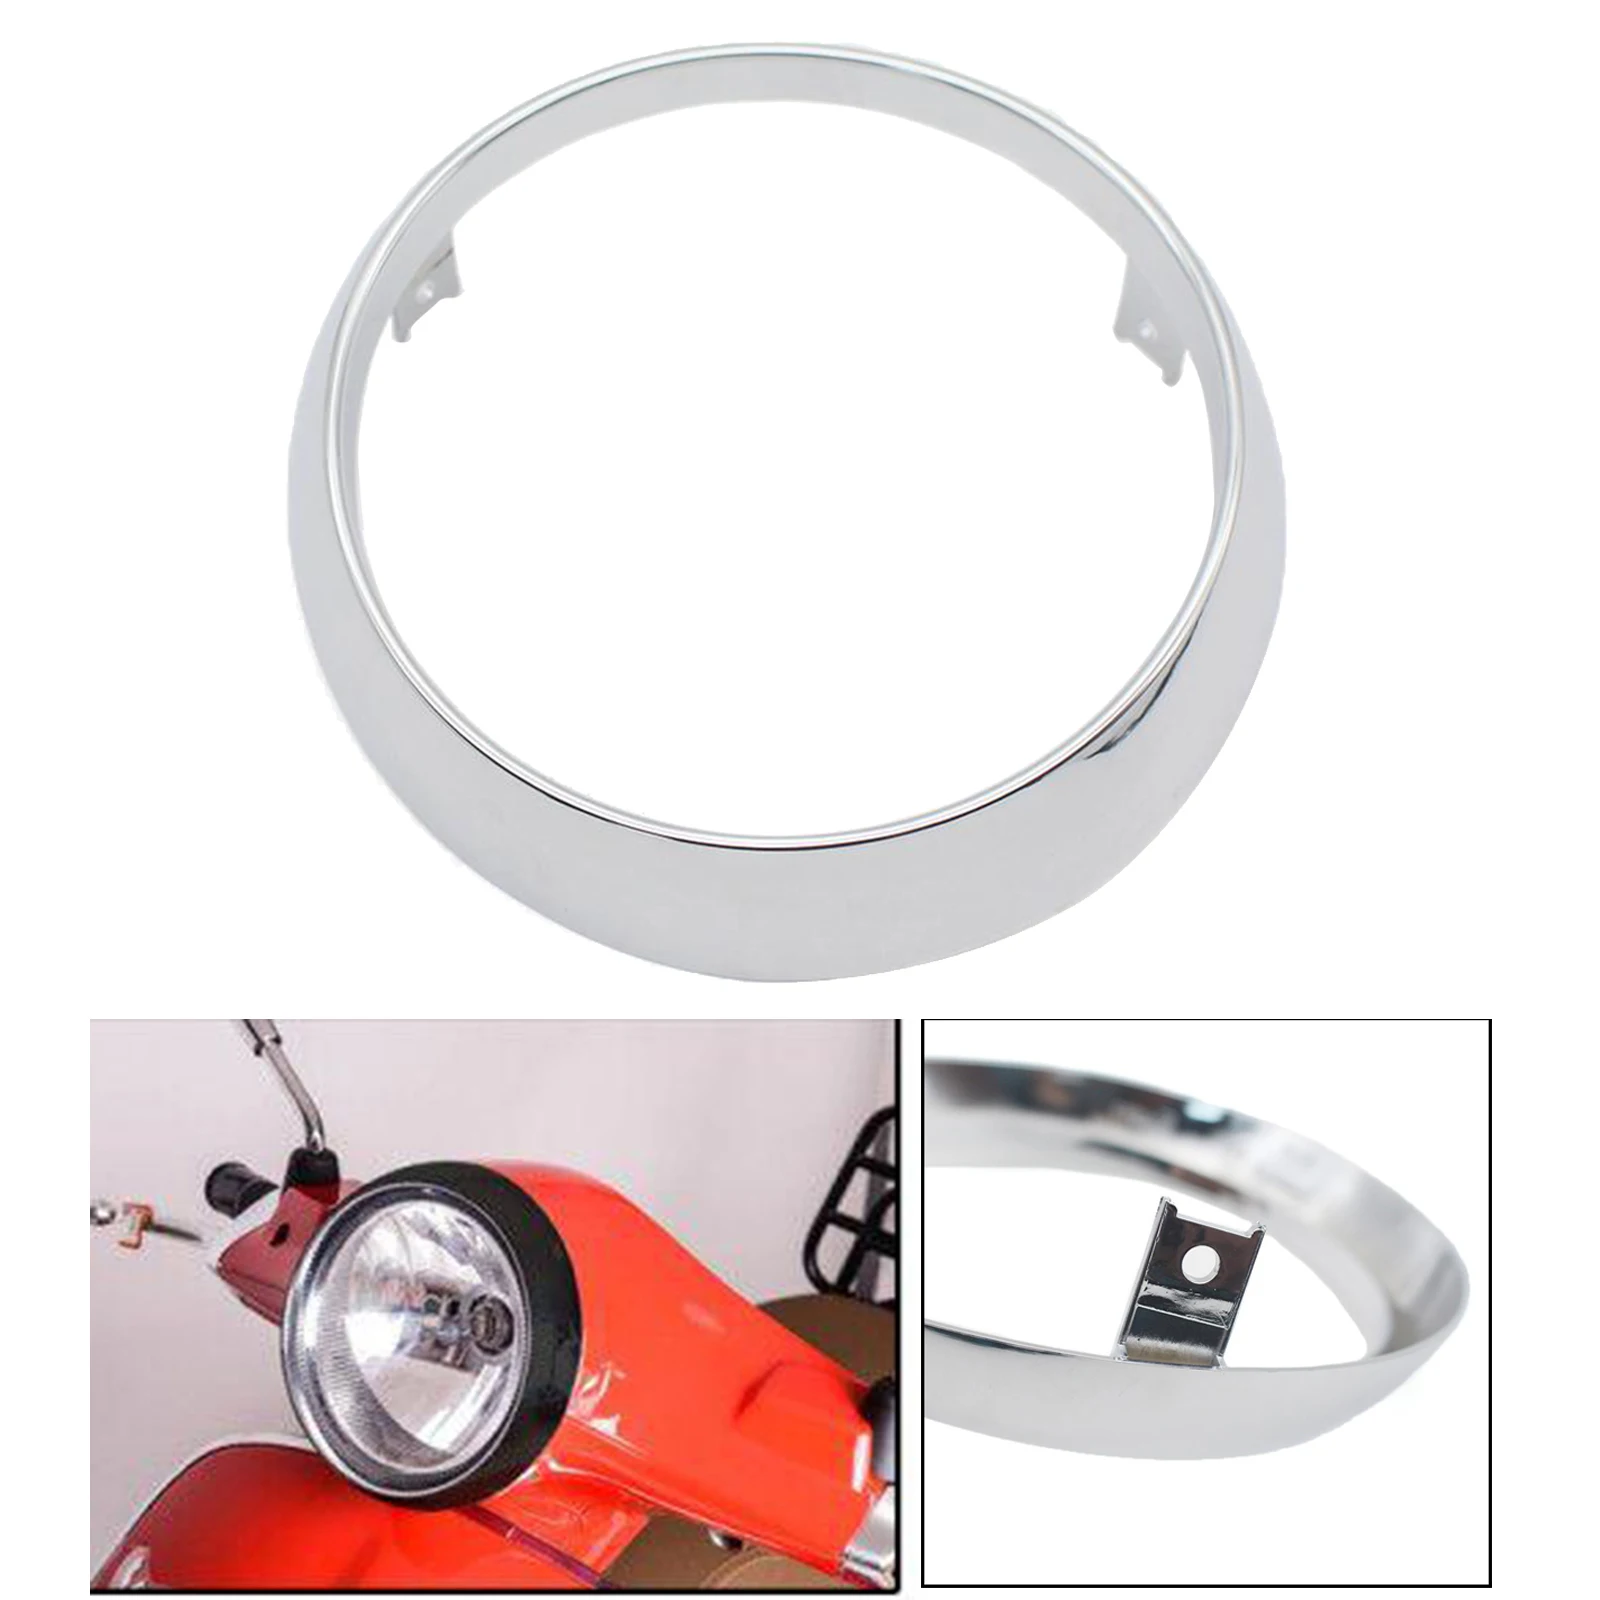 ABS Plastic Motorbike Headlight Trim Ring for Vespa Primavera 125 250 300 Easy to Use and Operate